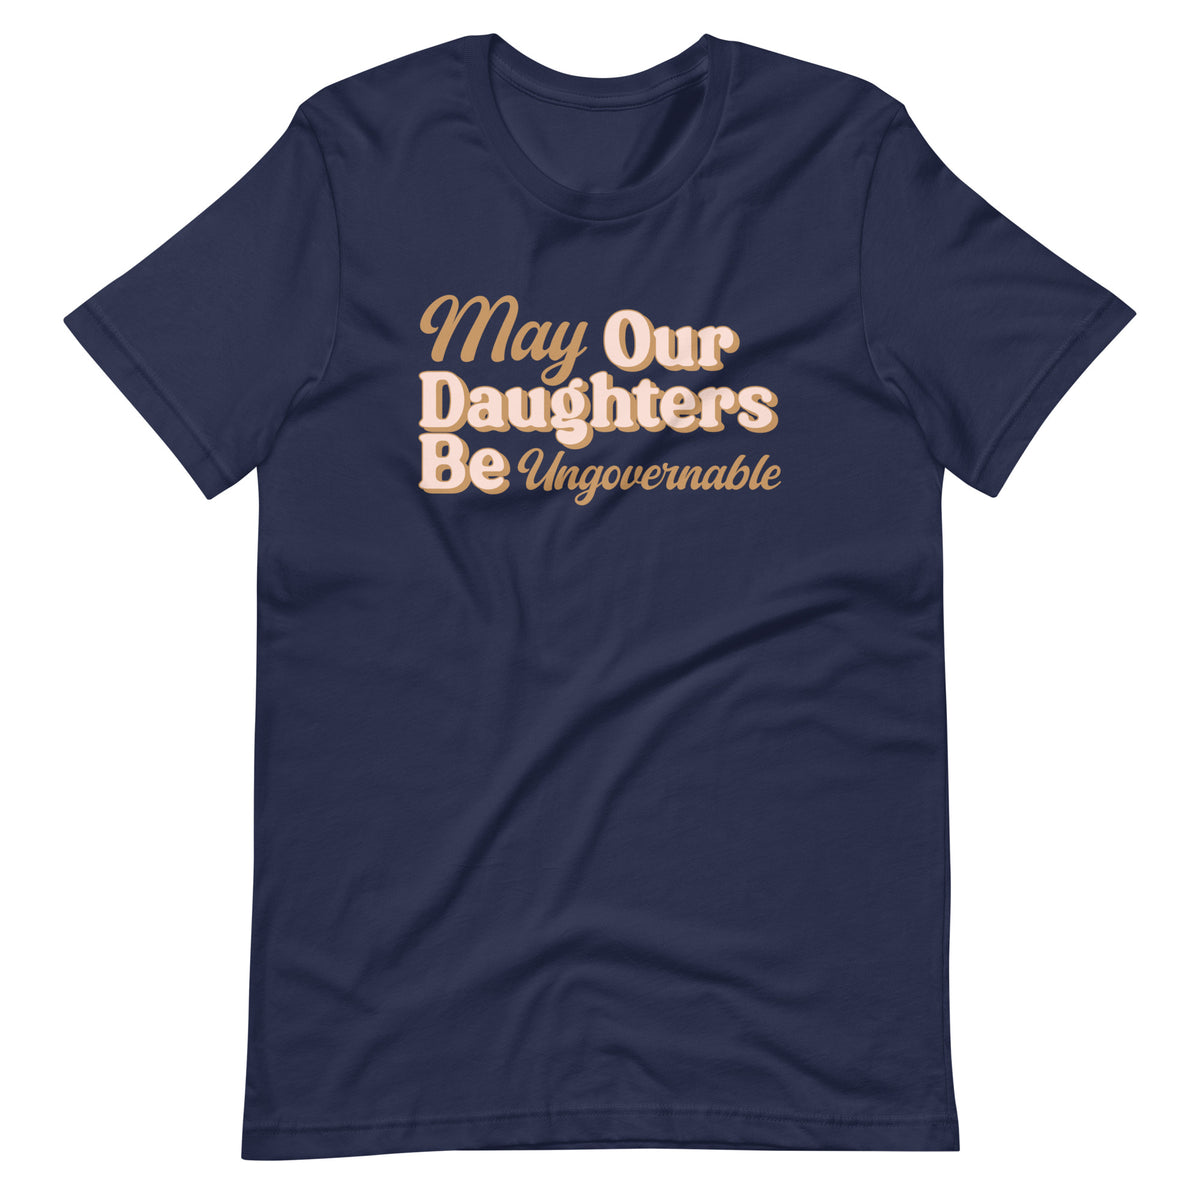 May Our Daughters Be Ungovernable T-Shirt